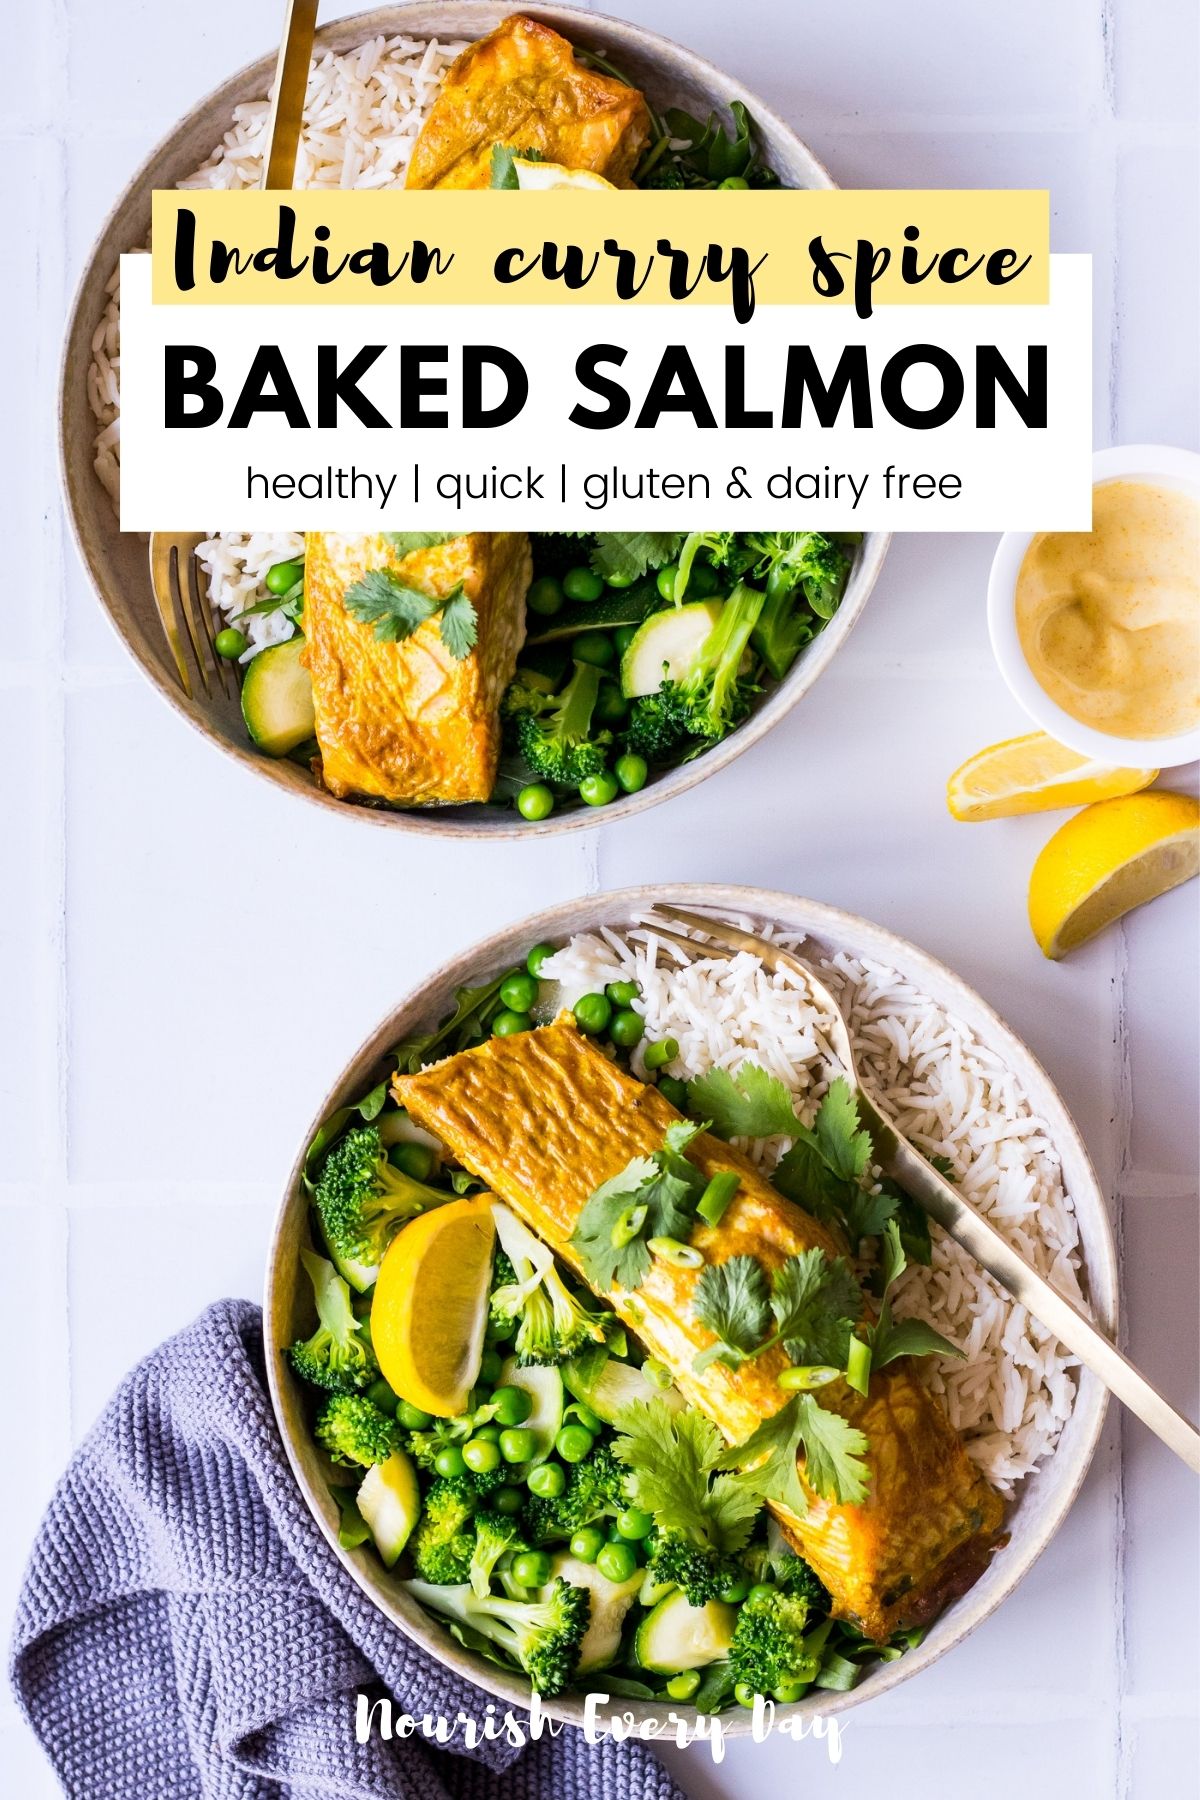 Curry Spice Baked Salmon Recipe Pin by Nourish Every Day